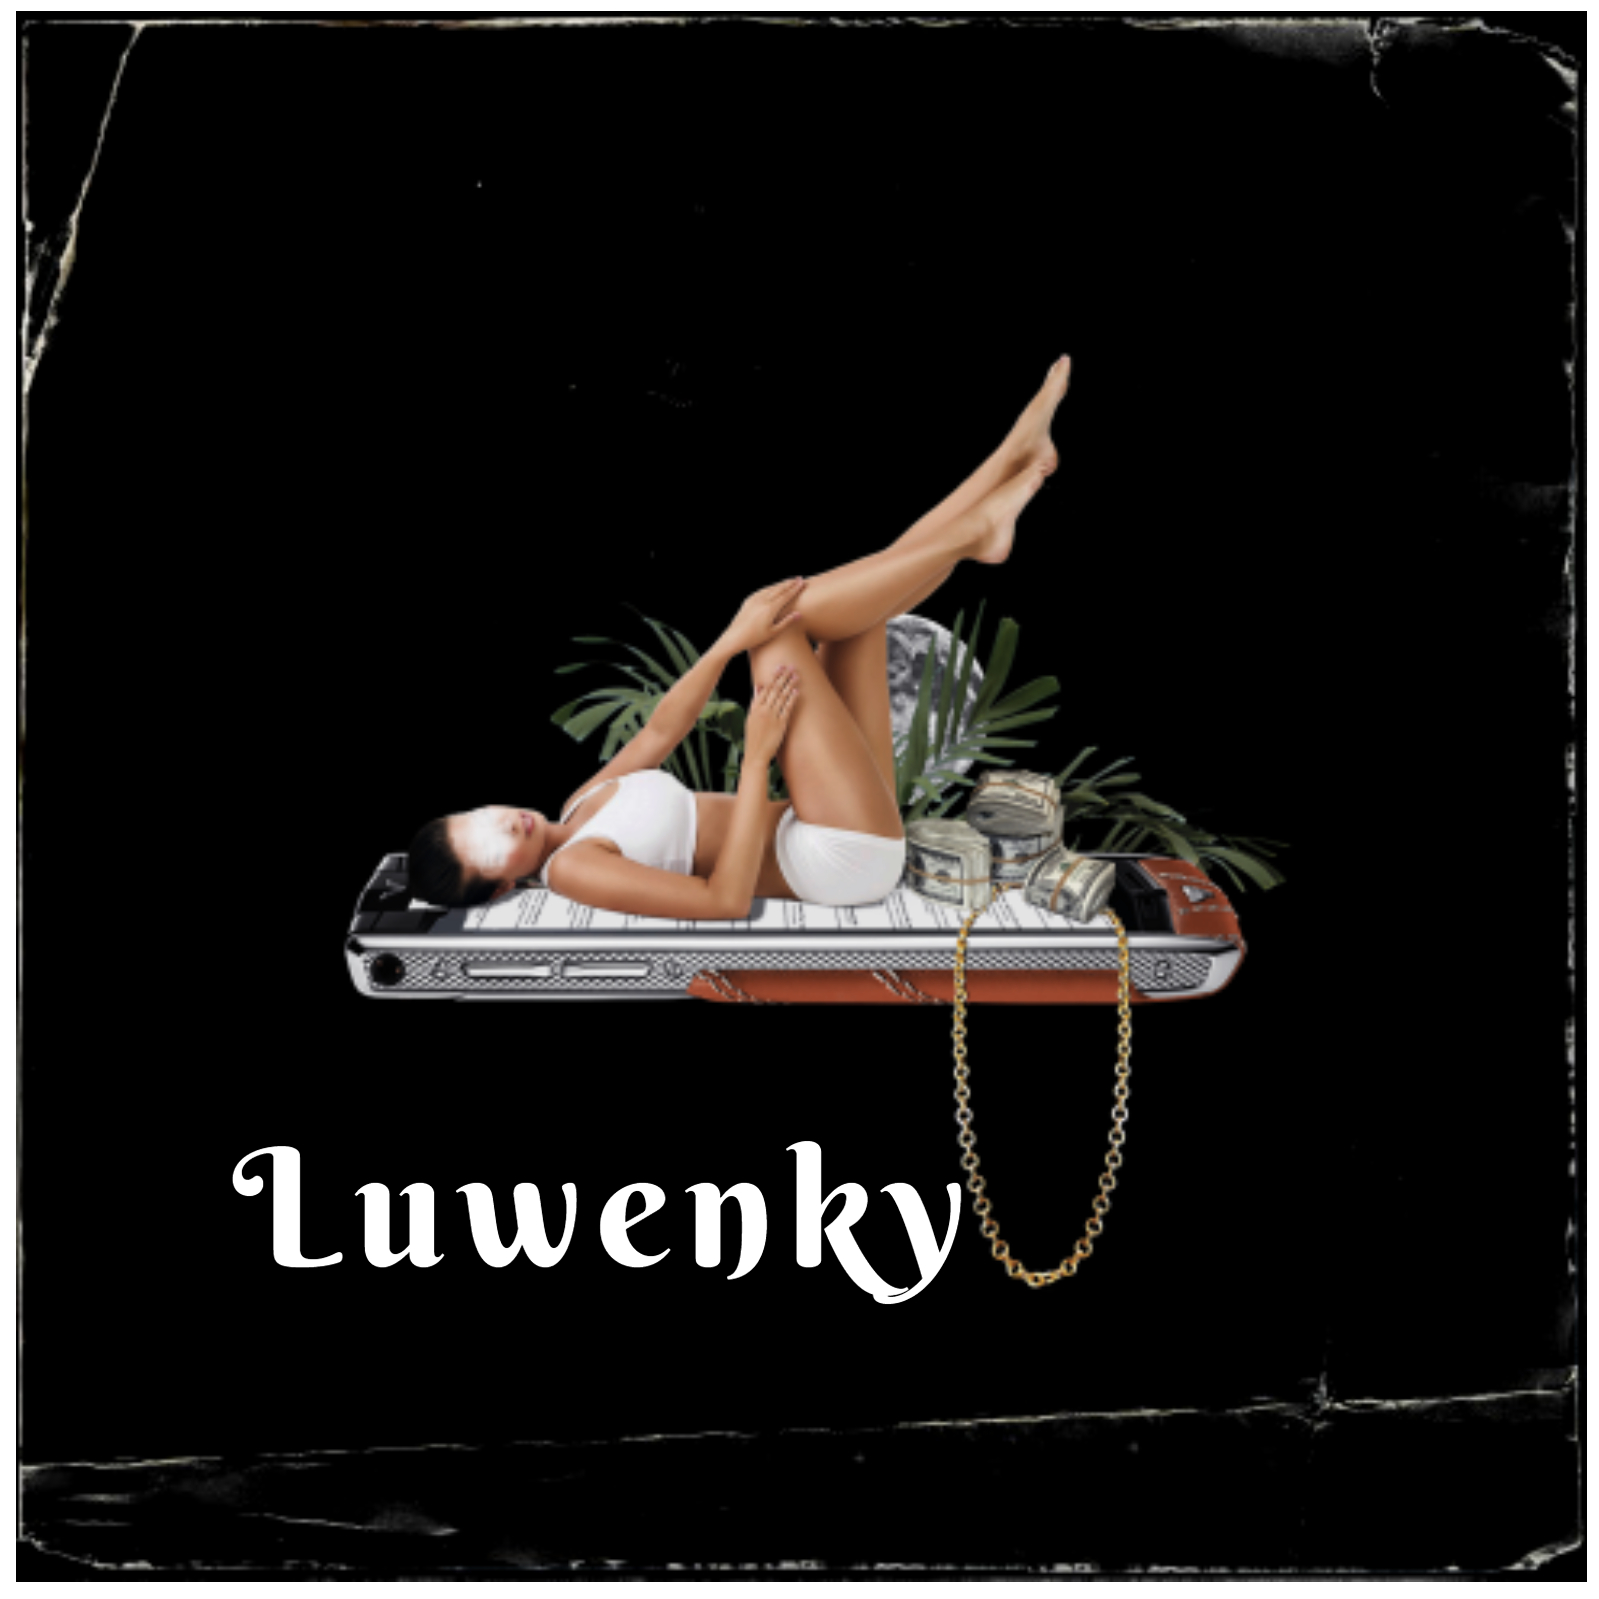 Luwenky